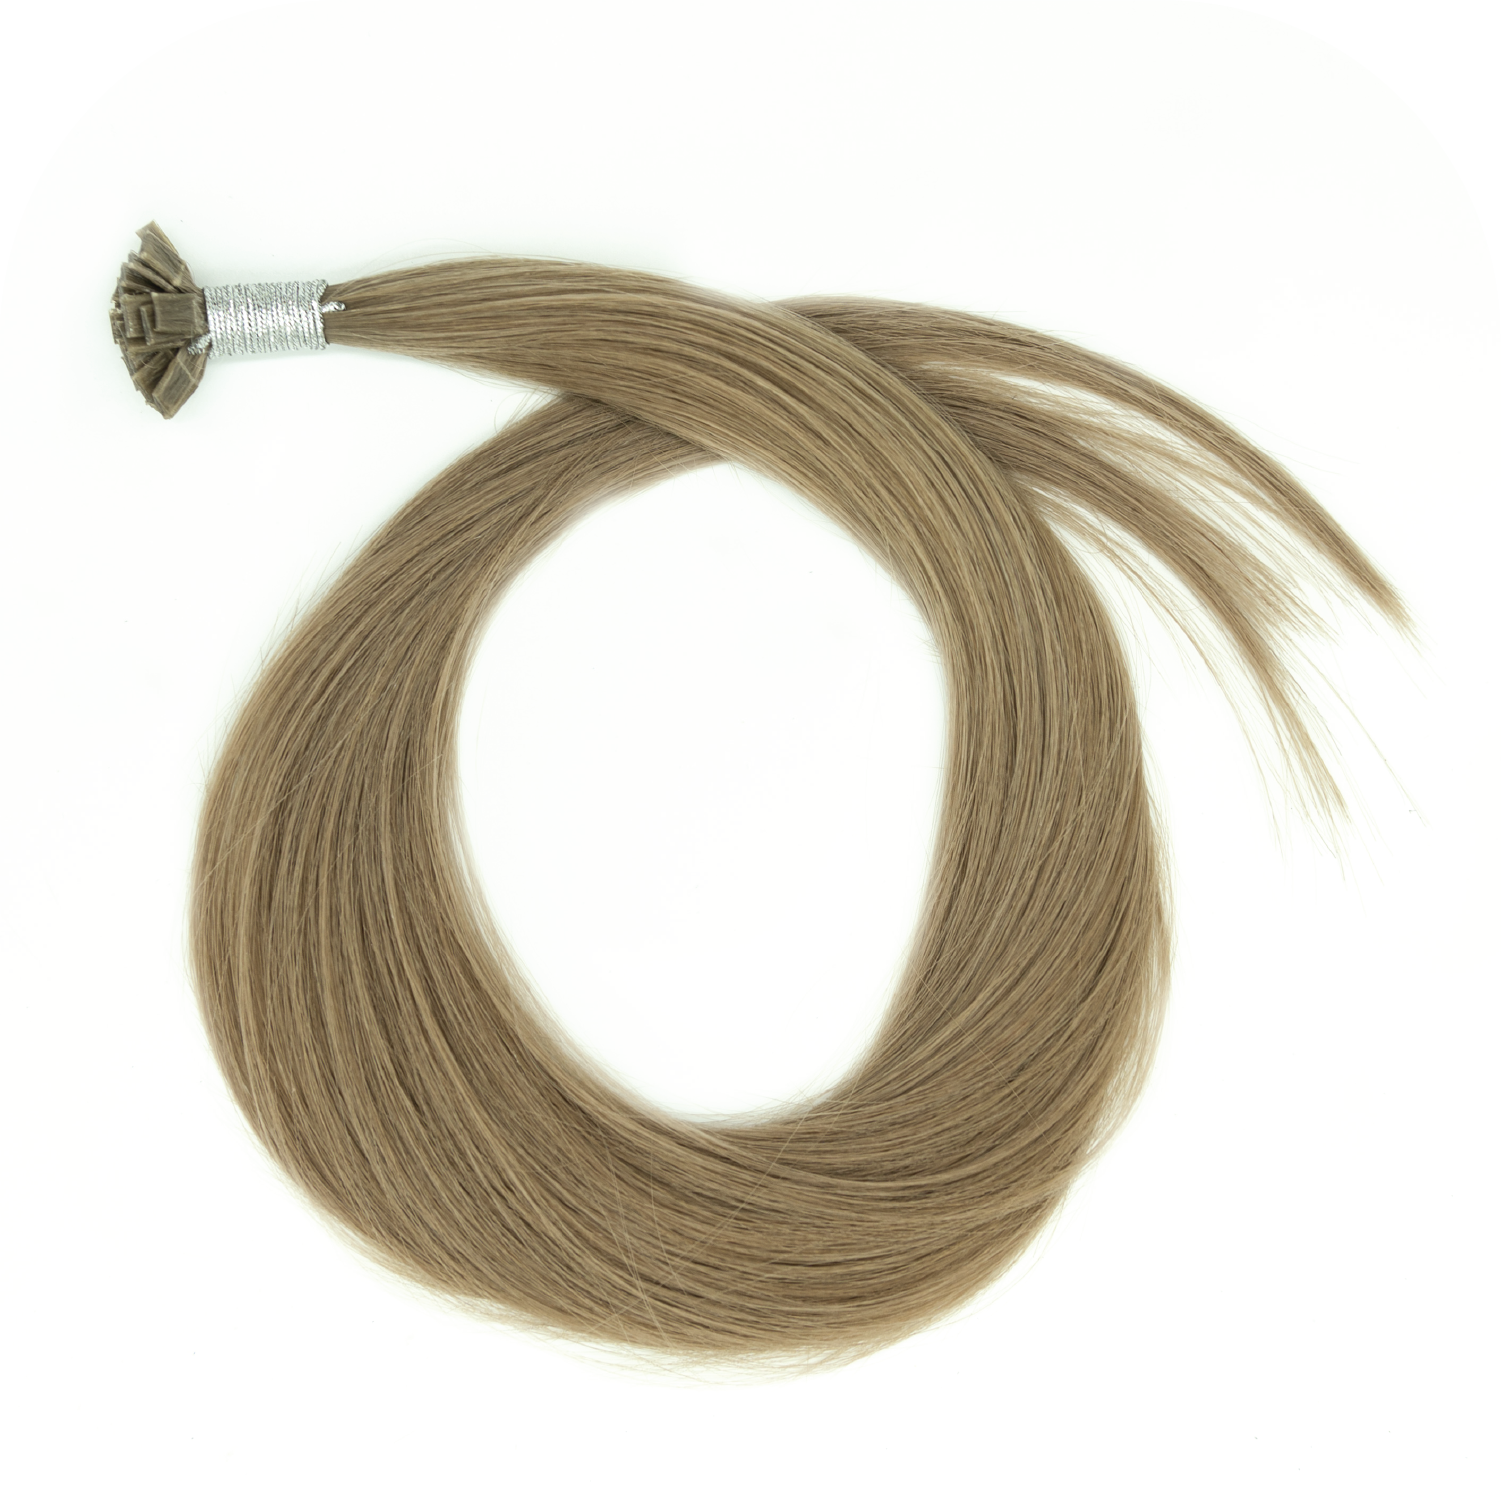 Couture Hair Co. Couture Tip or K Tip Hair Extension in Color Dark Blond #8